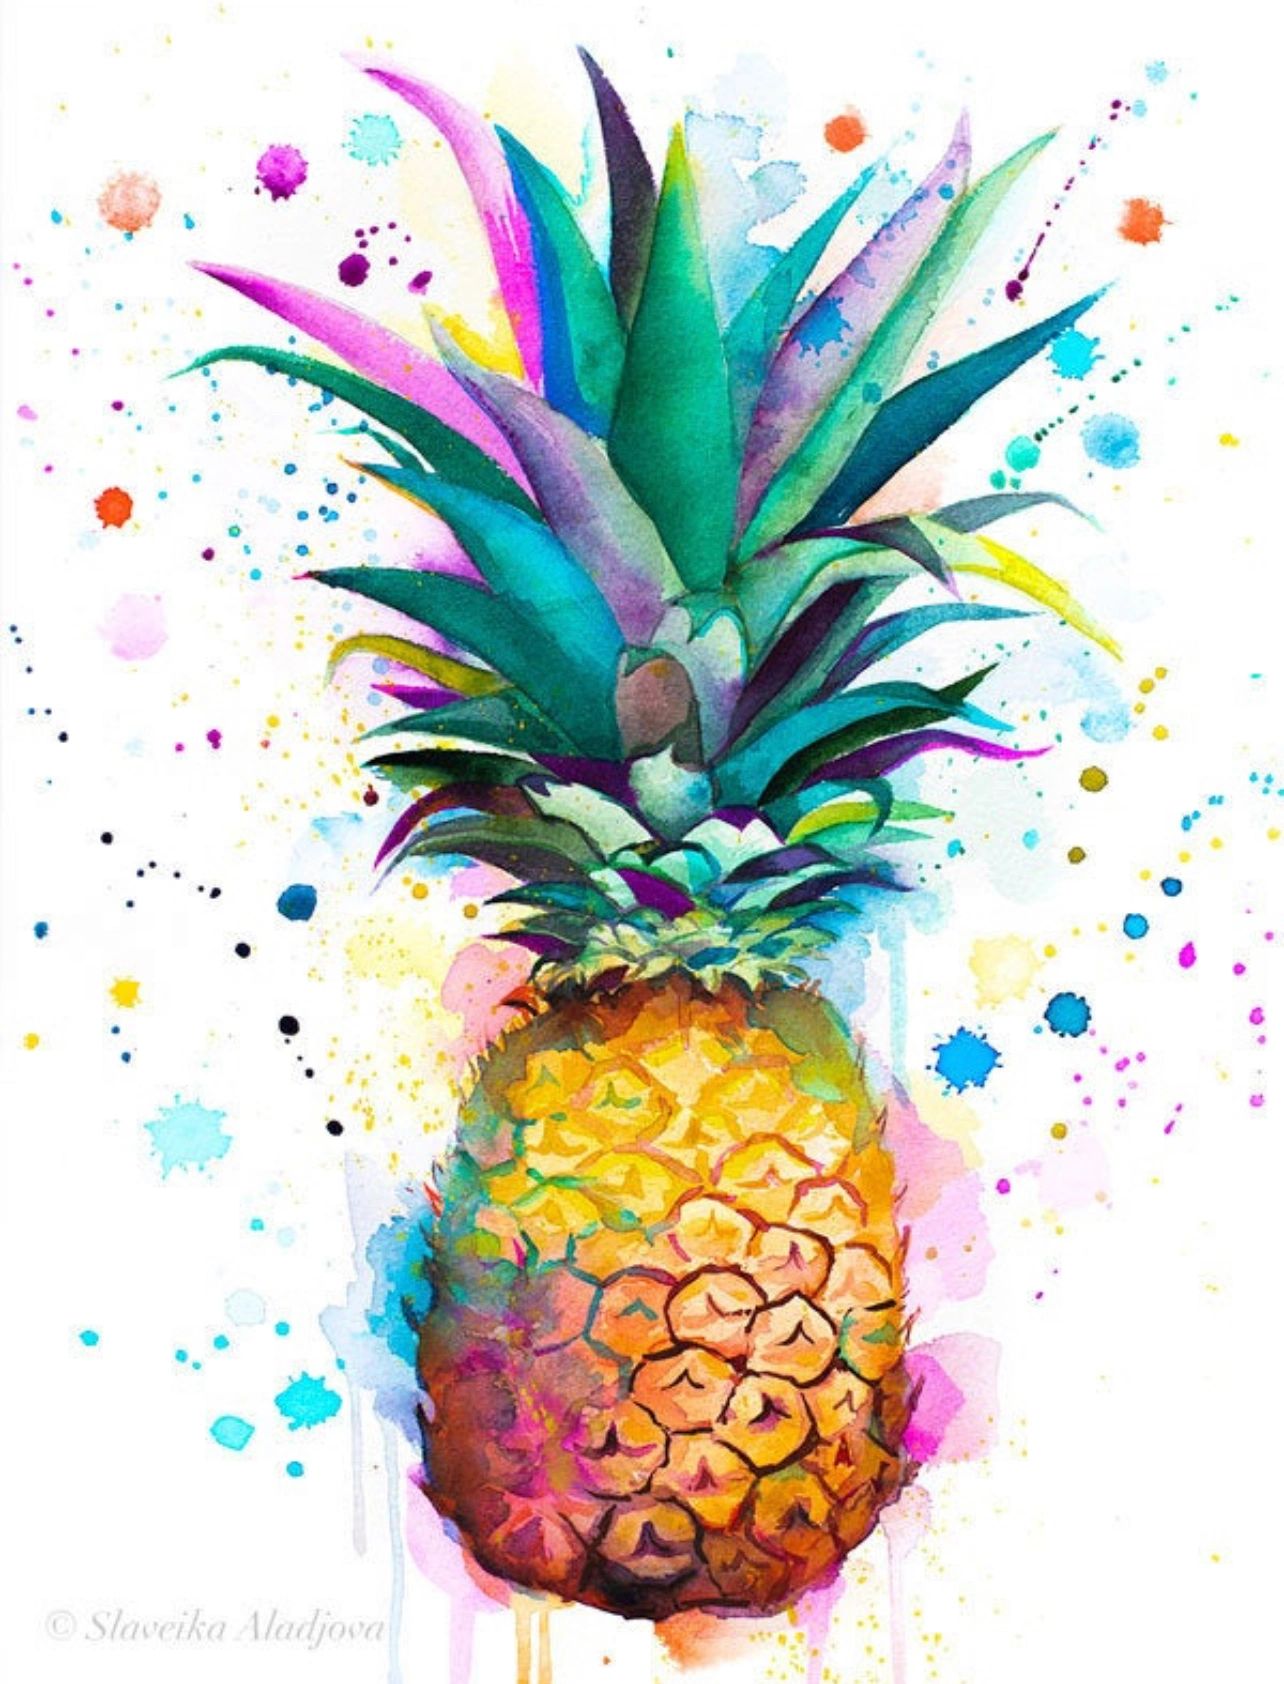 My inspiration -- the pineapple